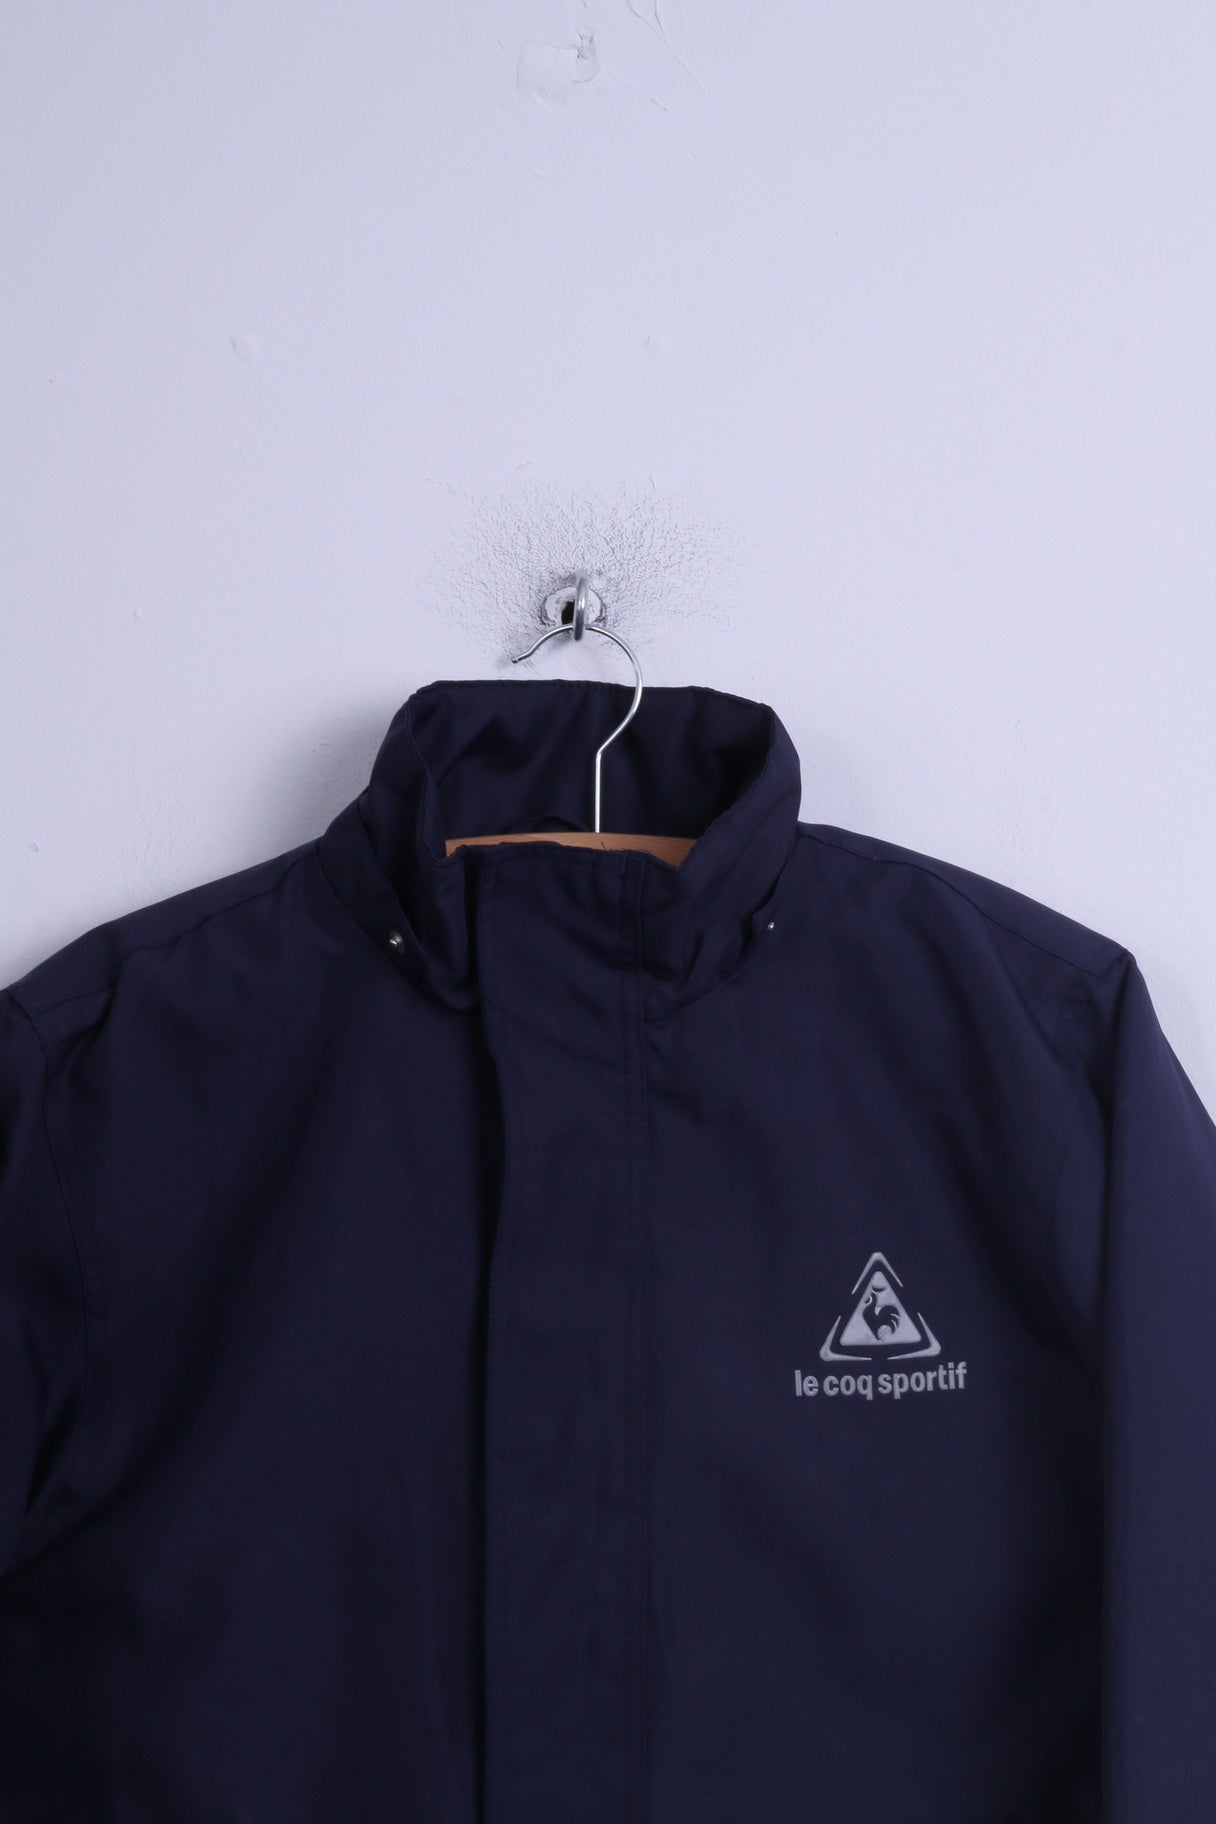 Le Coq Sportif Boys MB 14 Years Old M Pullover Jacket Navy Blue Reactive Technology